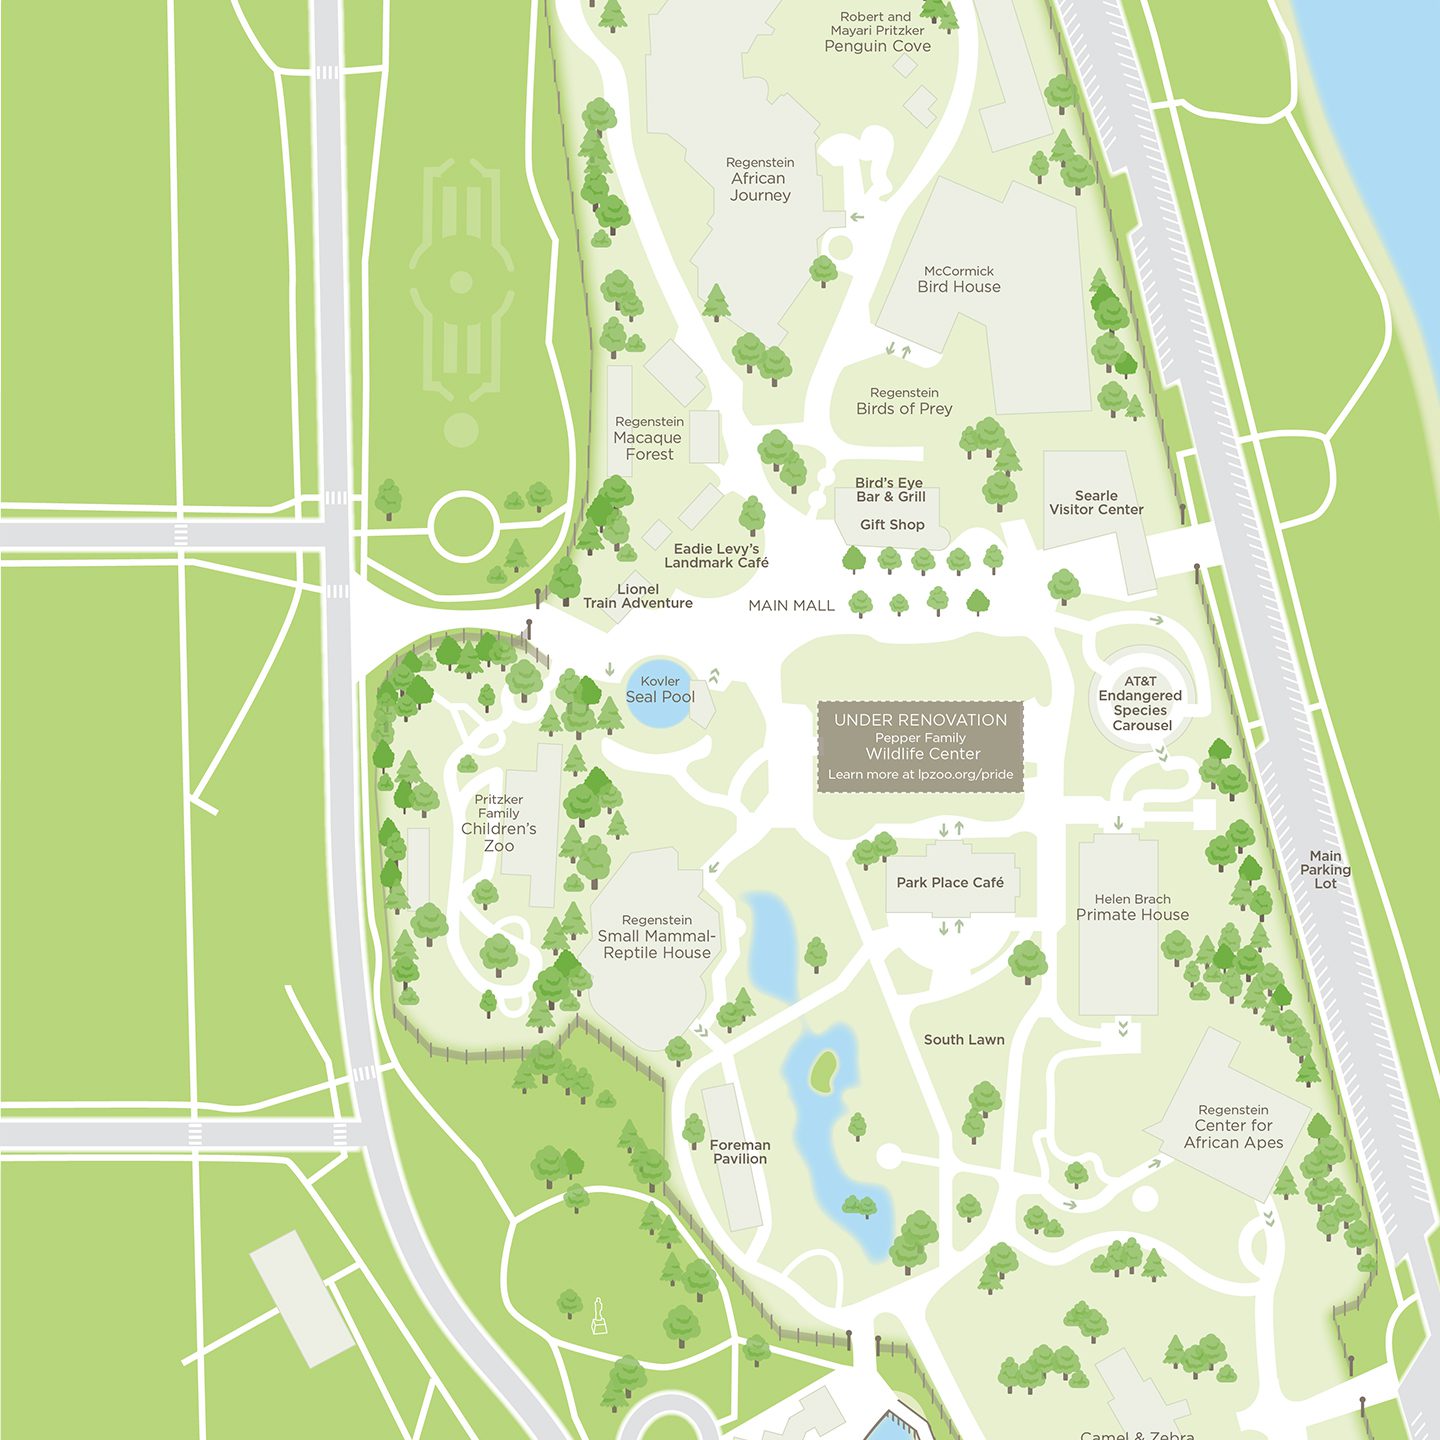 A map of the zoo